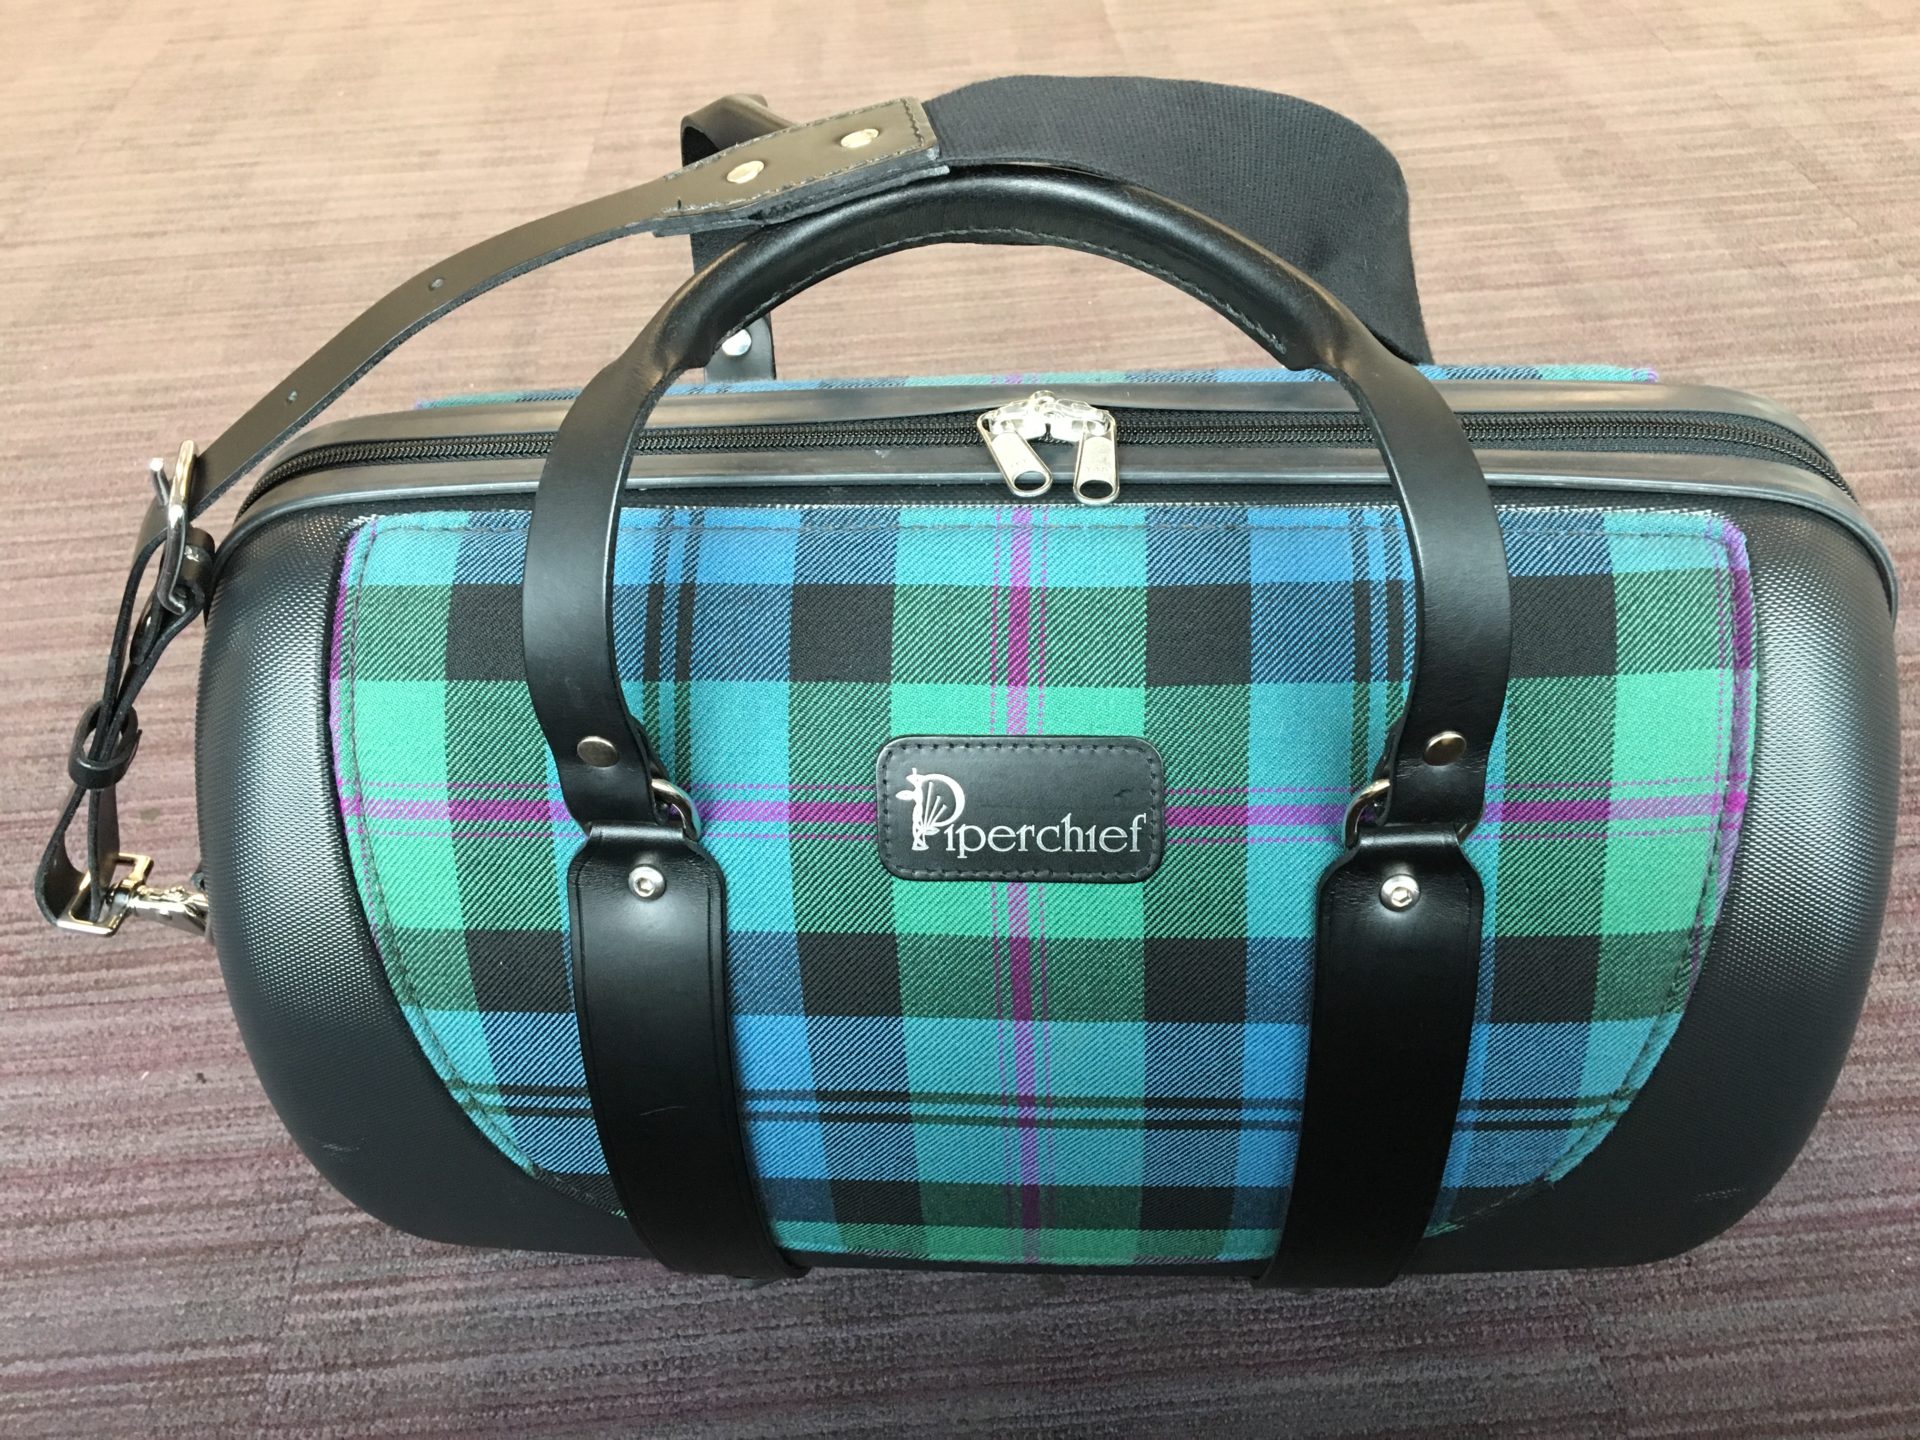 Picture of Piper Chief bag